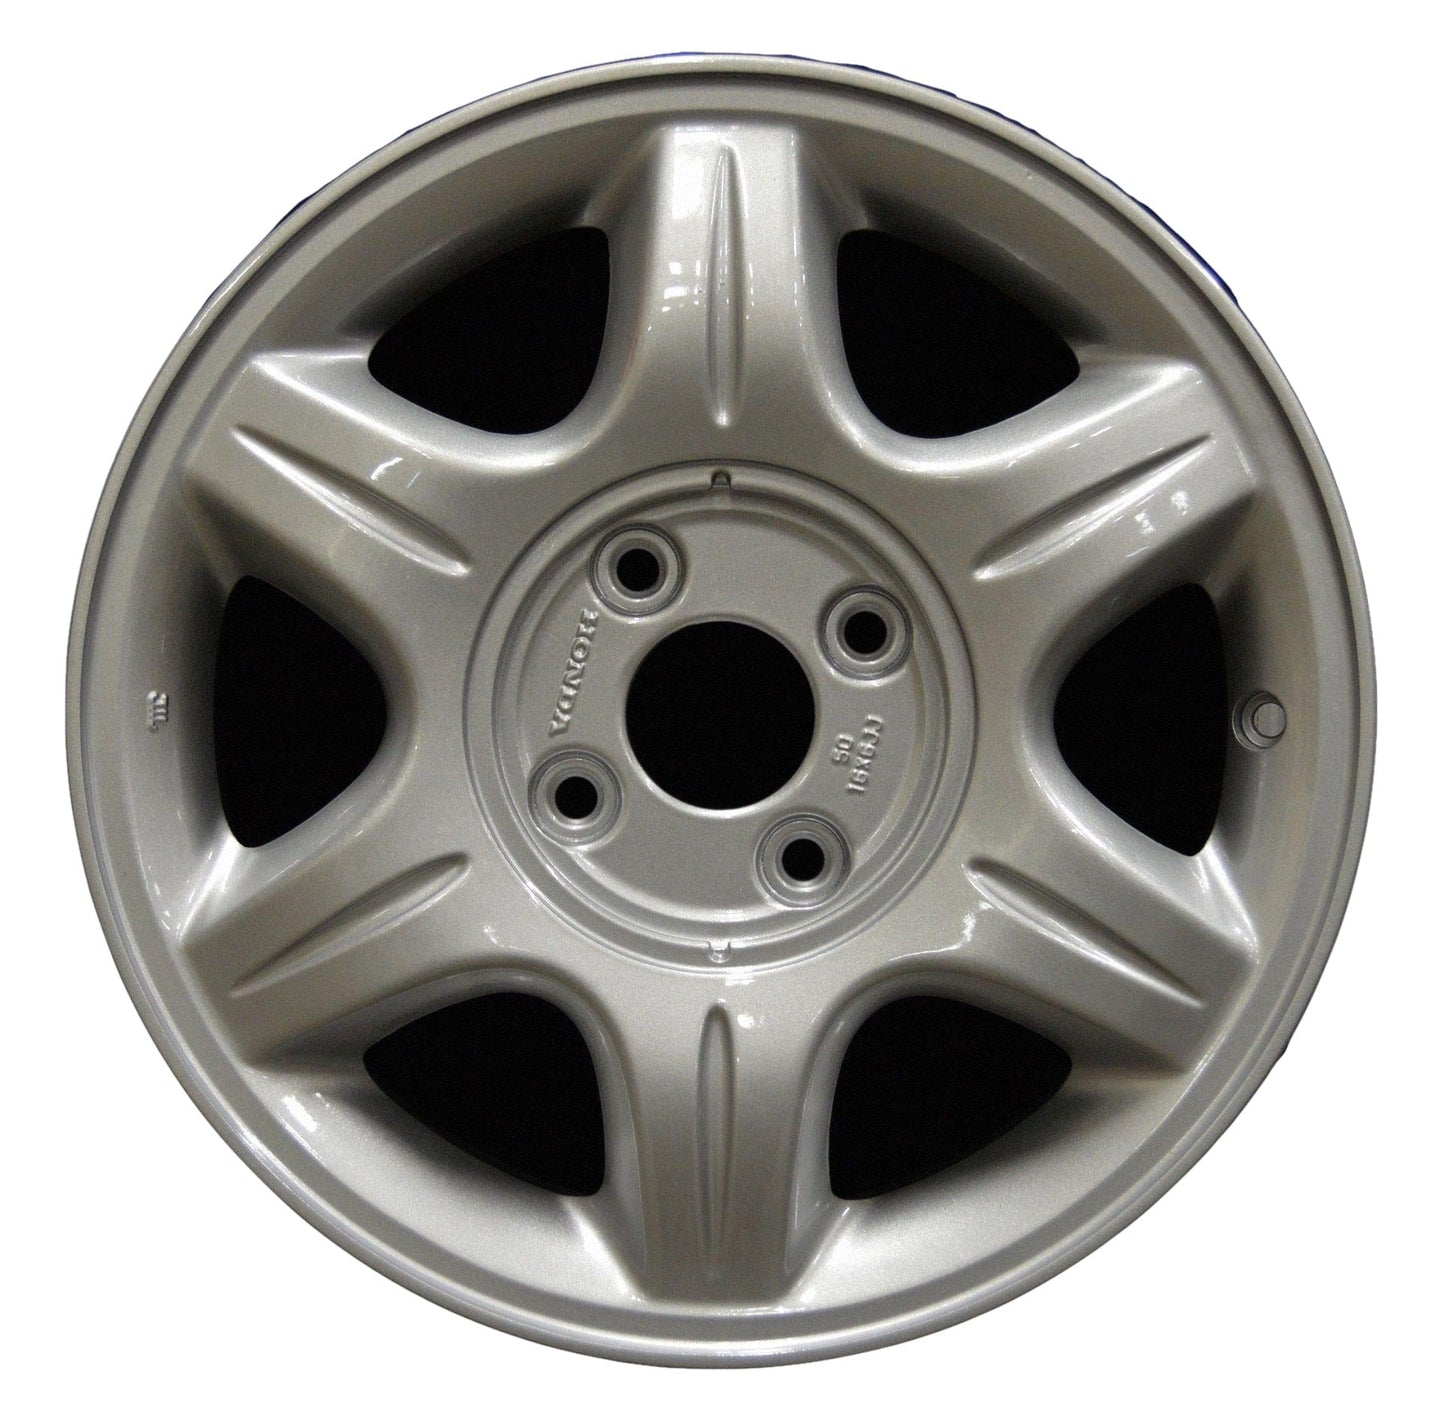 Acura CL  1997, 1998, 1999 Factory OEM Car Wheel Size 16x6 Alloy WAO.71676.PS10.FF